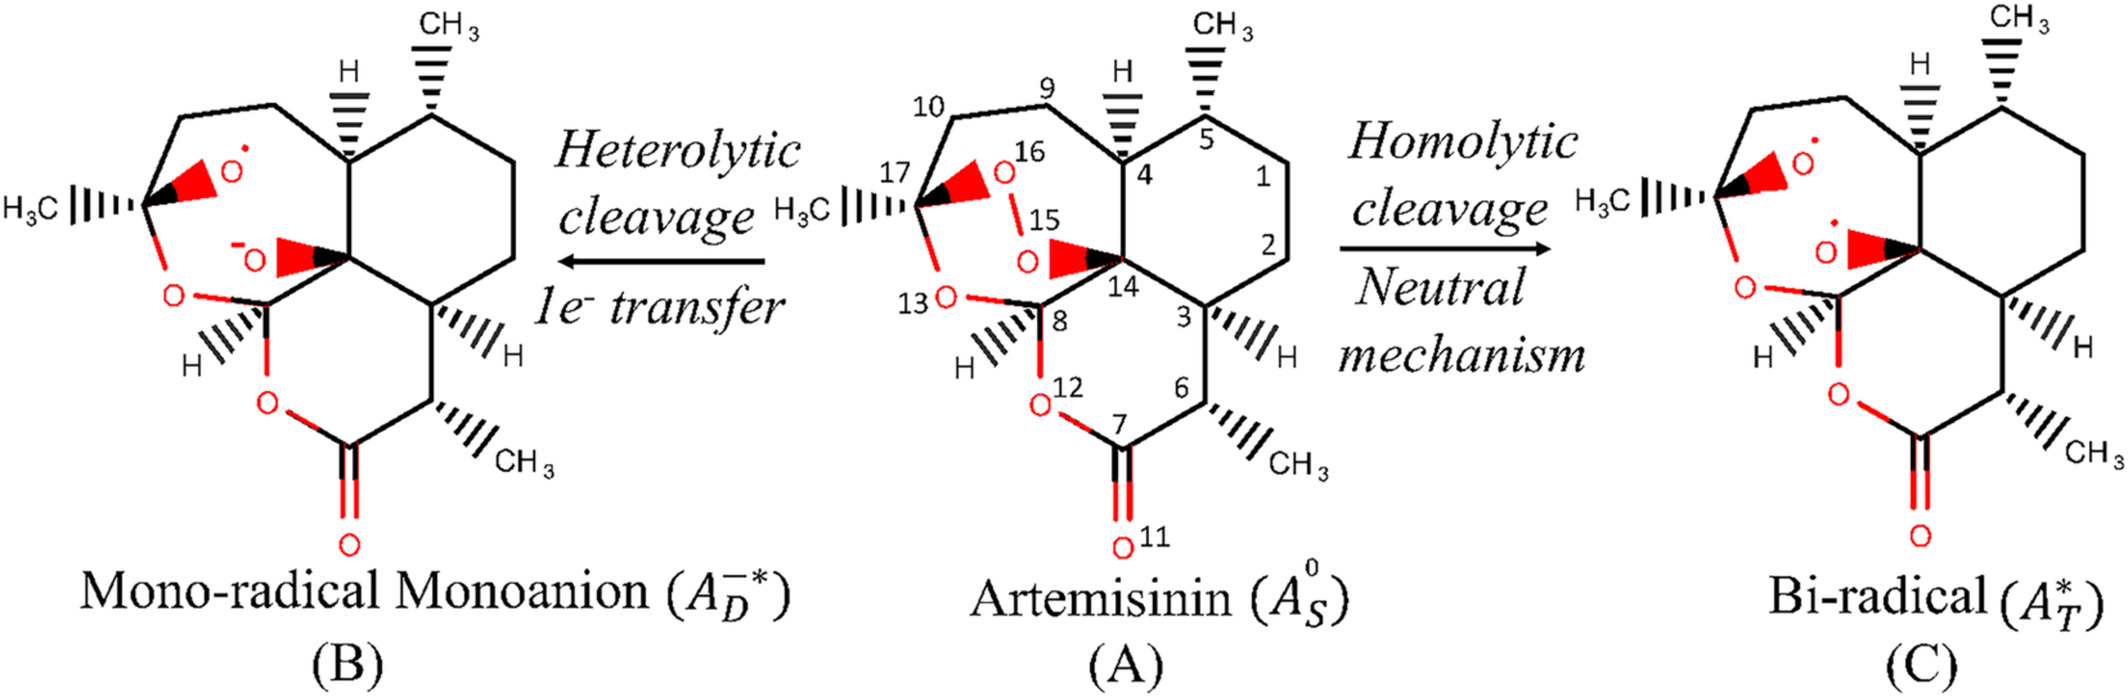 Nonreductive homolytic scission of endoperoxide bond for activation of artemisinin: A parallel mechanism to Heterolytic cleavage